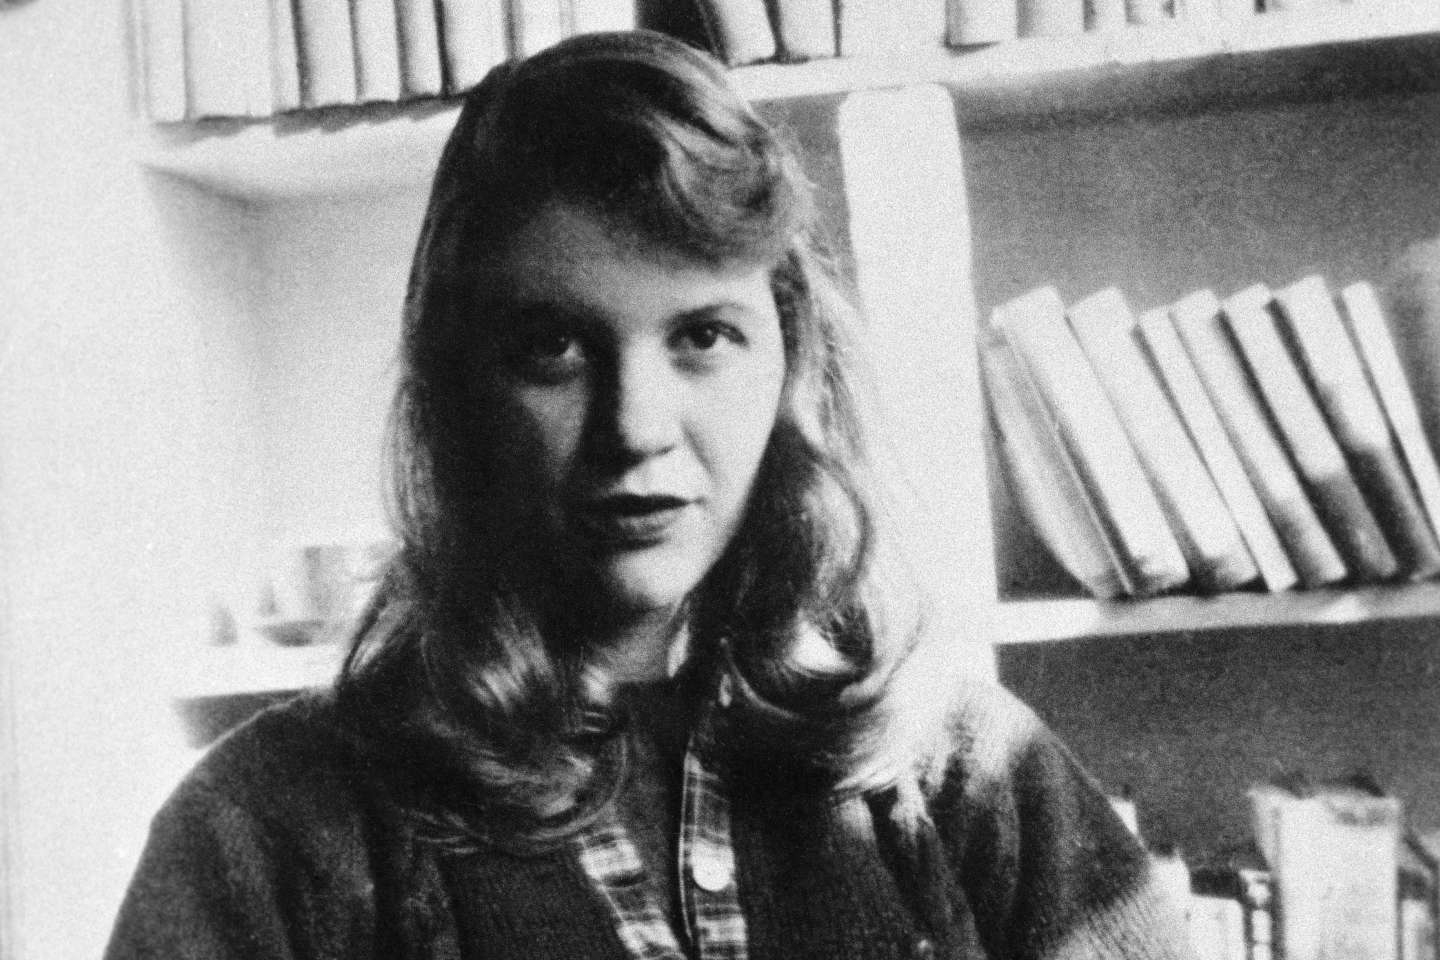 “The Bell of Distress”, by Sylvia Plath: a love song to the mad girl